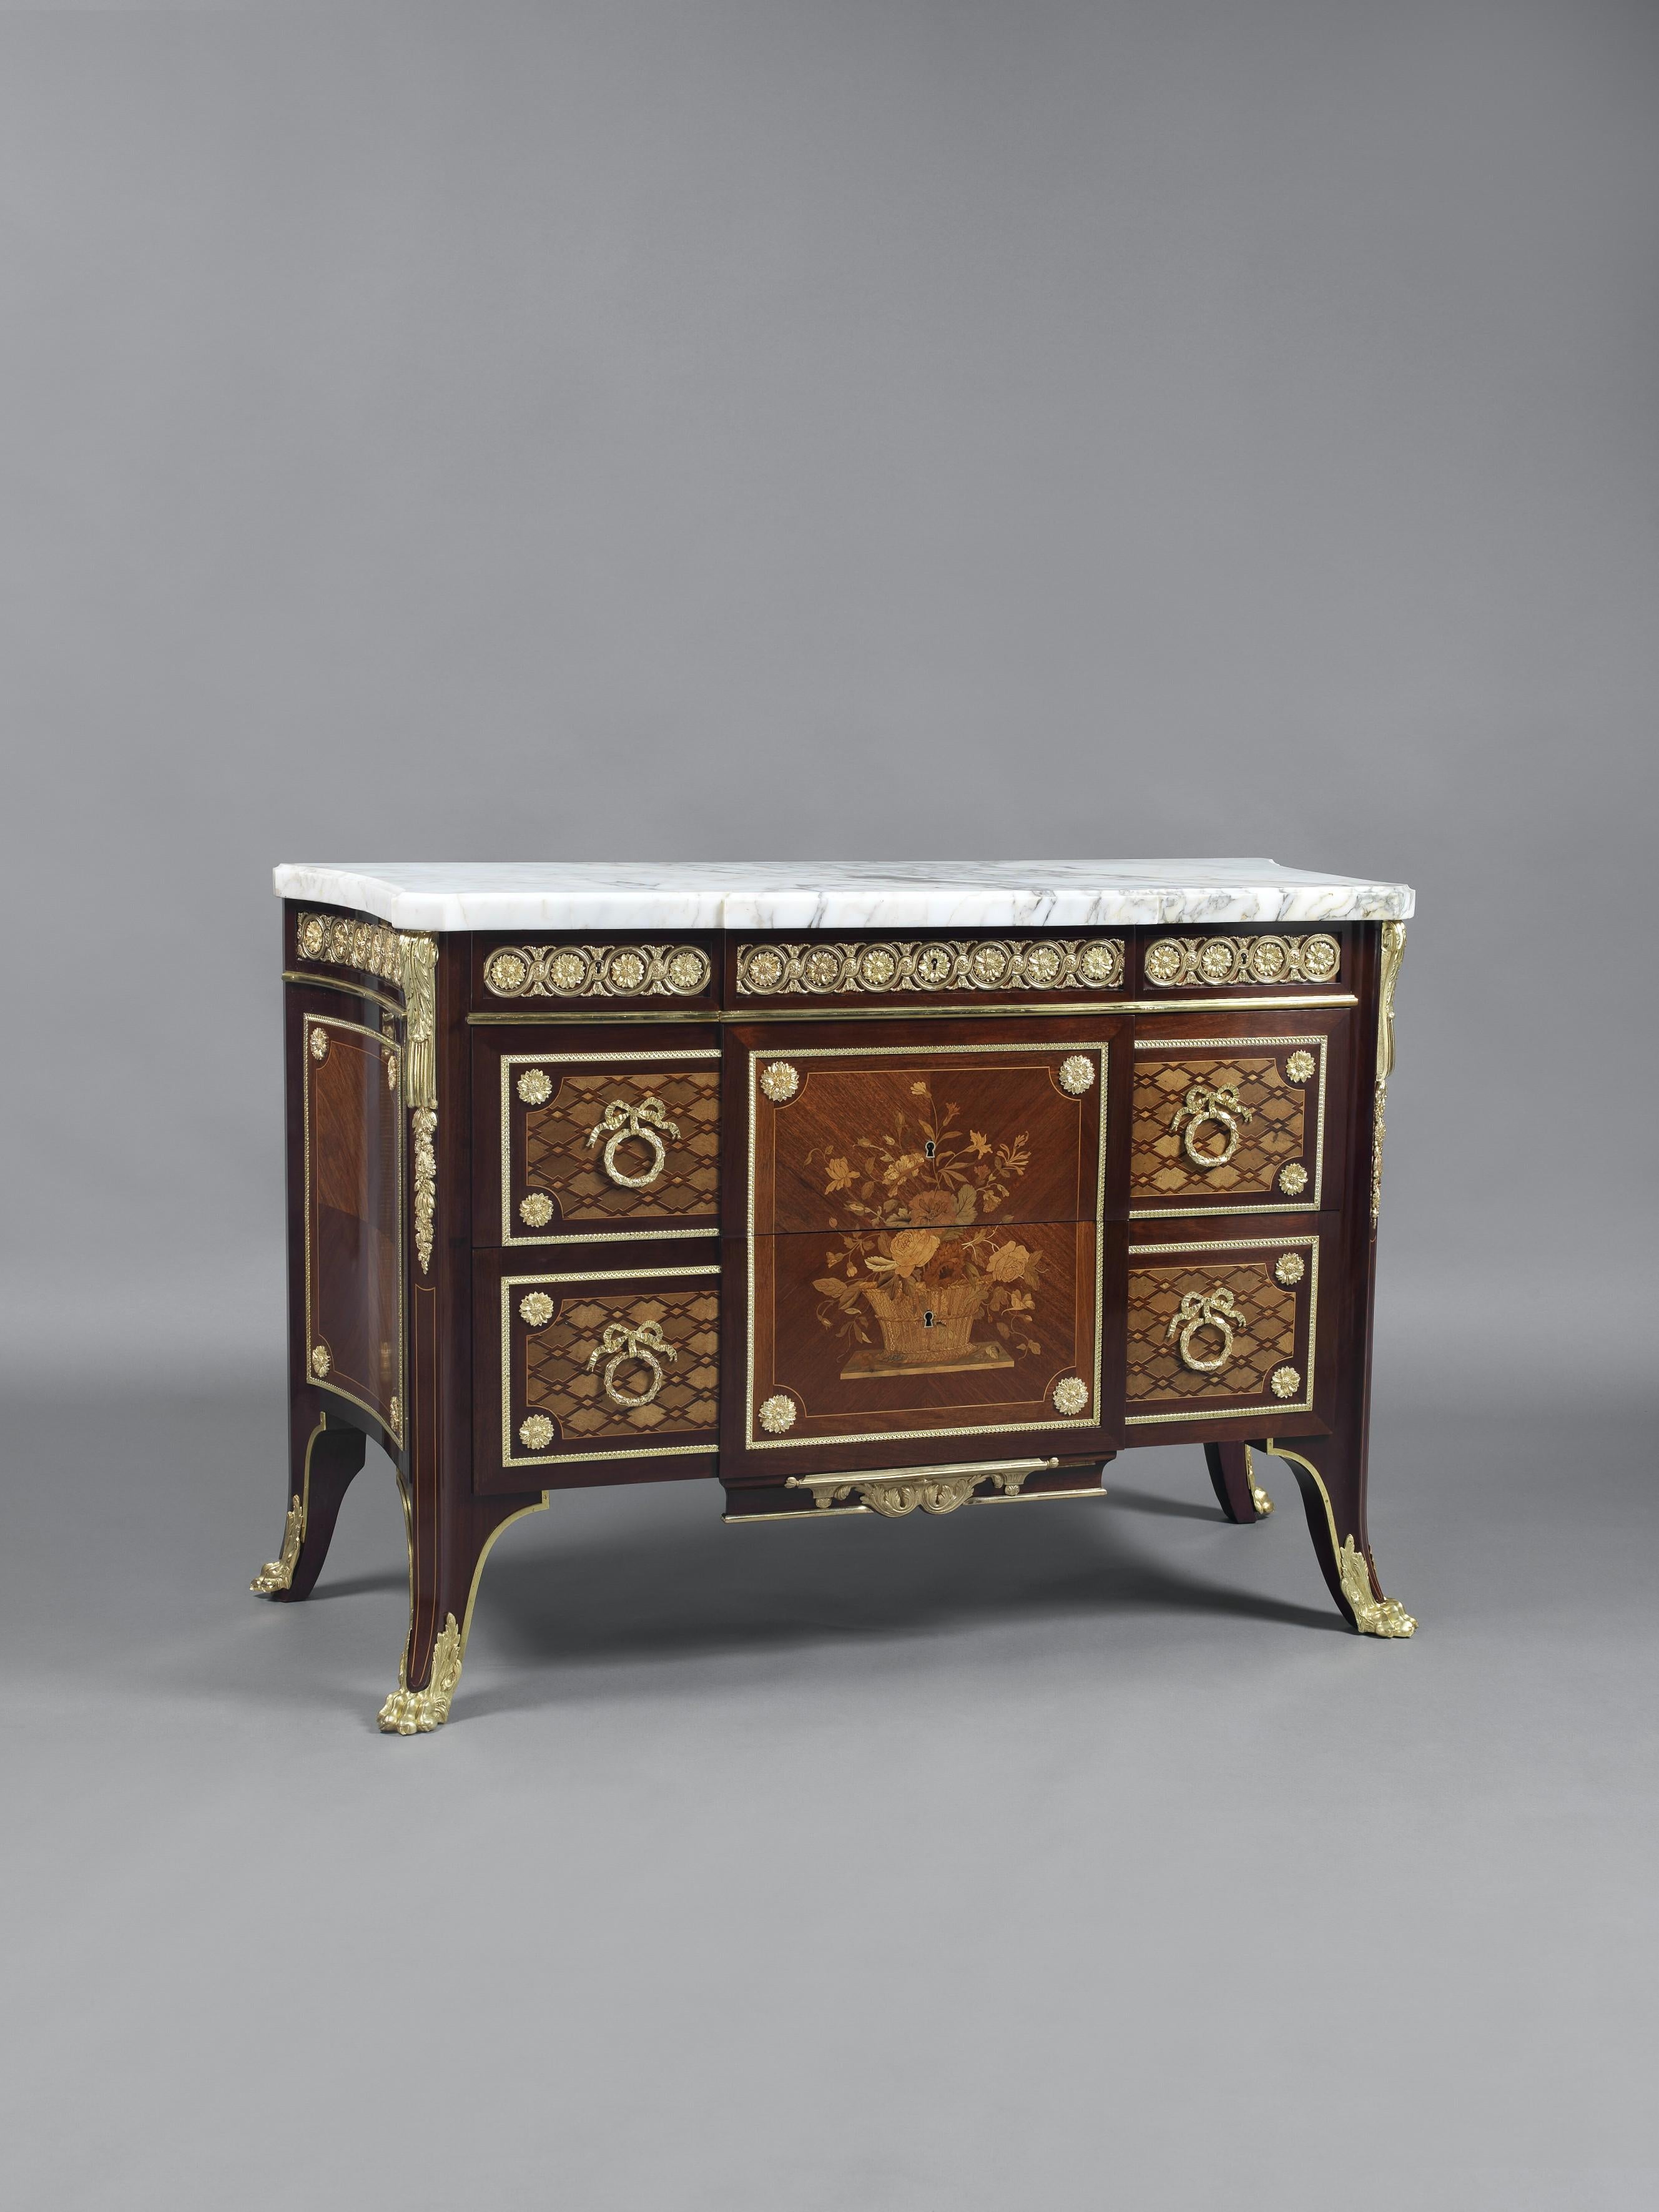 A Fine Louis XVI Style mahogany and Marquetry Inlaid neoclassical breakfront commode in the manner of Jean-Henri Riesener.

French, circa 1890. 

The bronzes stamped to the reverse ‘MK’.

This fine commode has a shaped Carrara Bianco marble